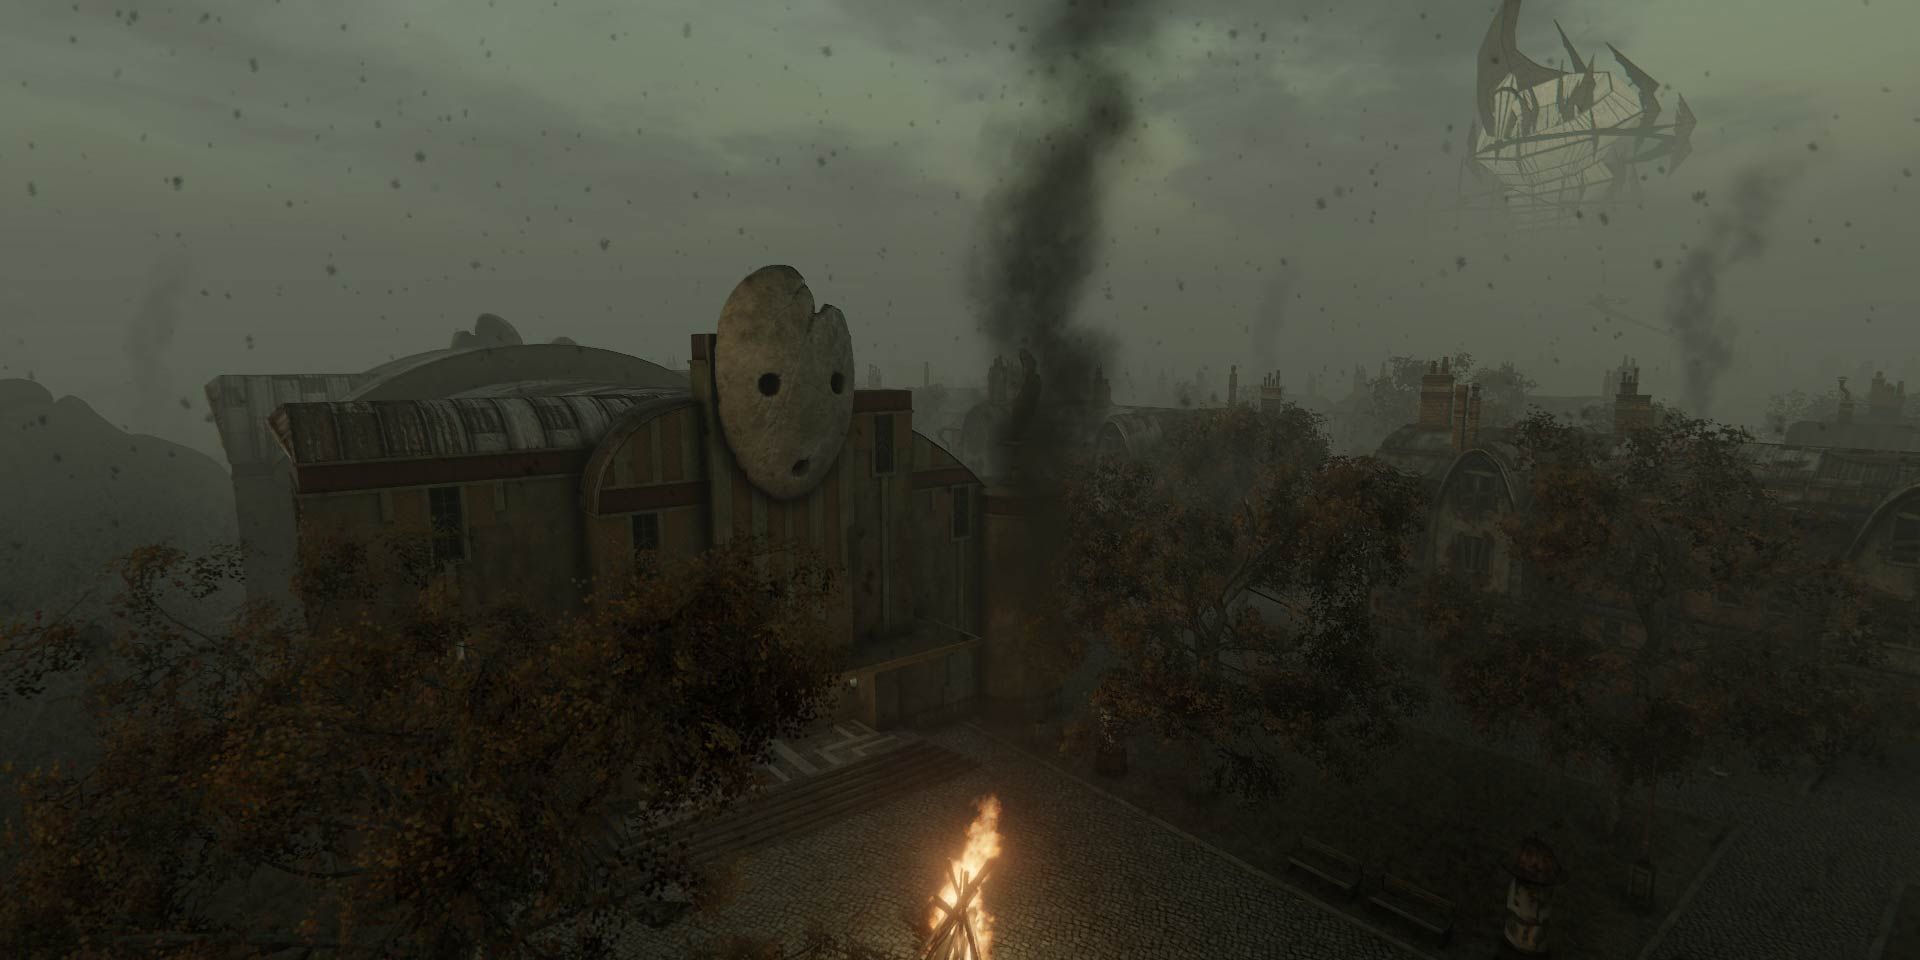 The Theater from Pathologic, with the Polyhedron looming in the background.